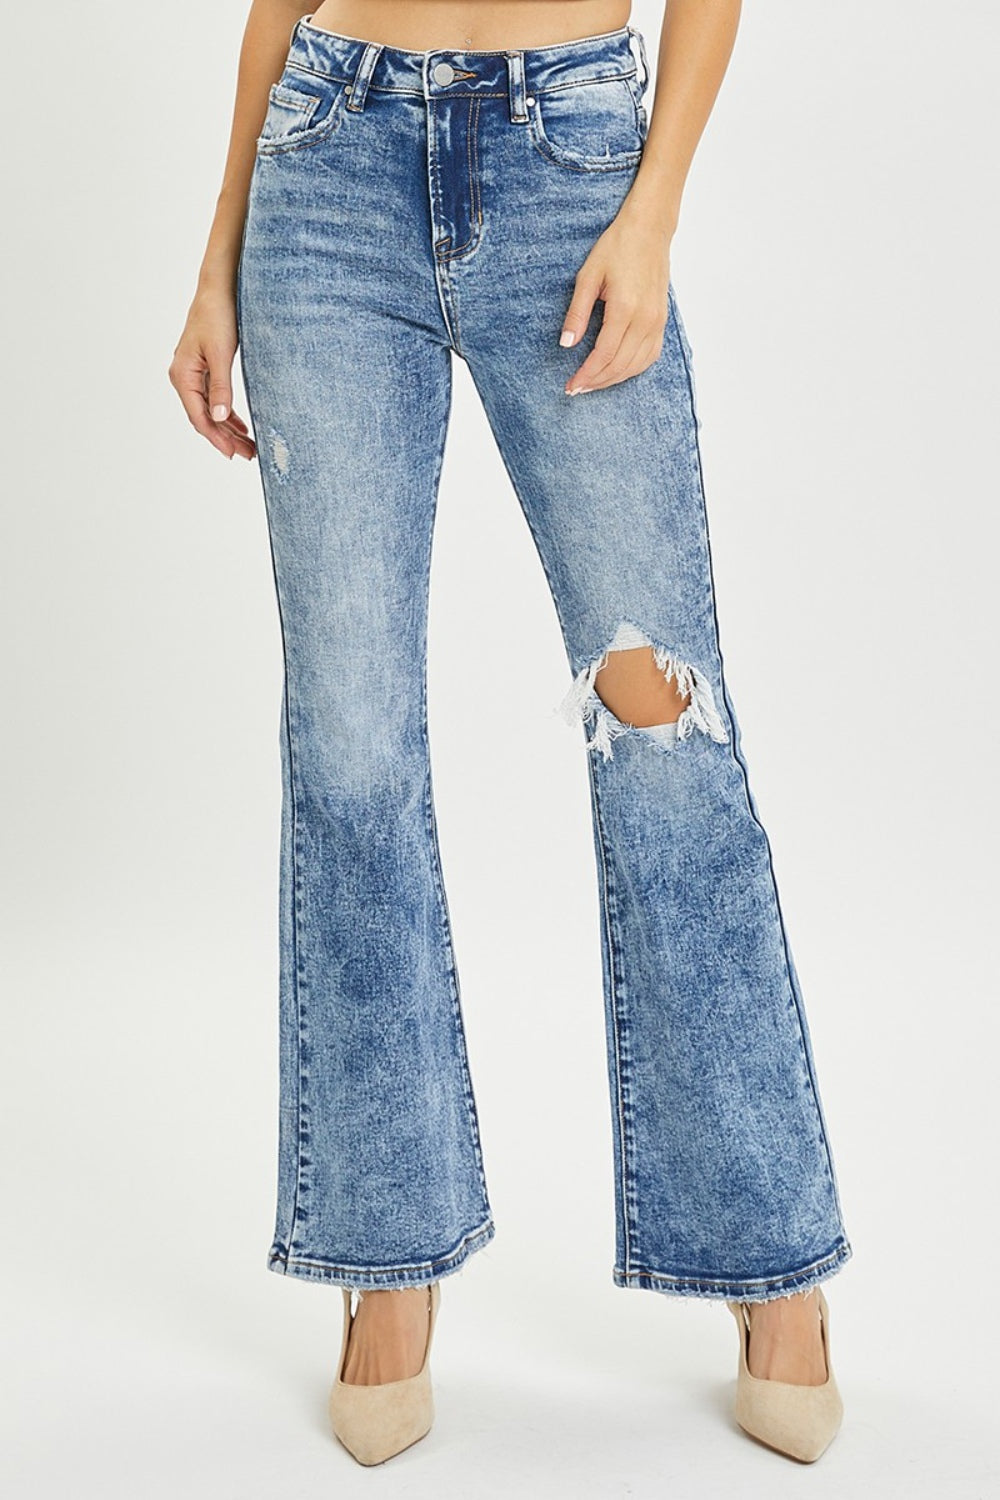 RISEN - High Rise Acid Wash Distressed Flare Jeans - Inspired Eye Boutique